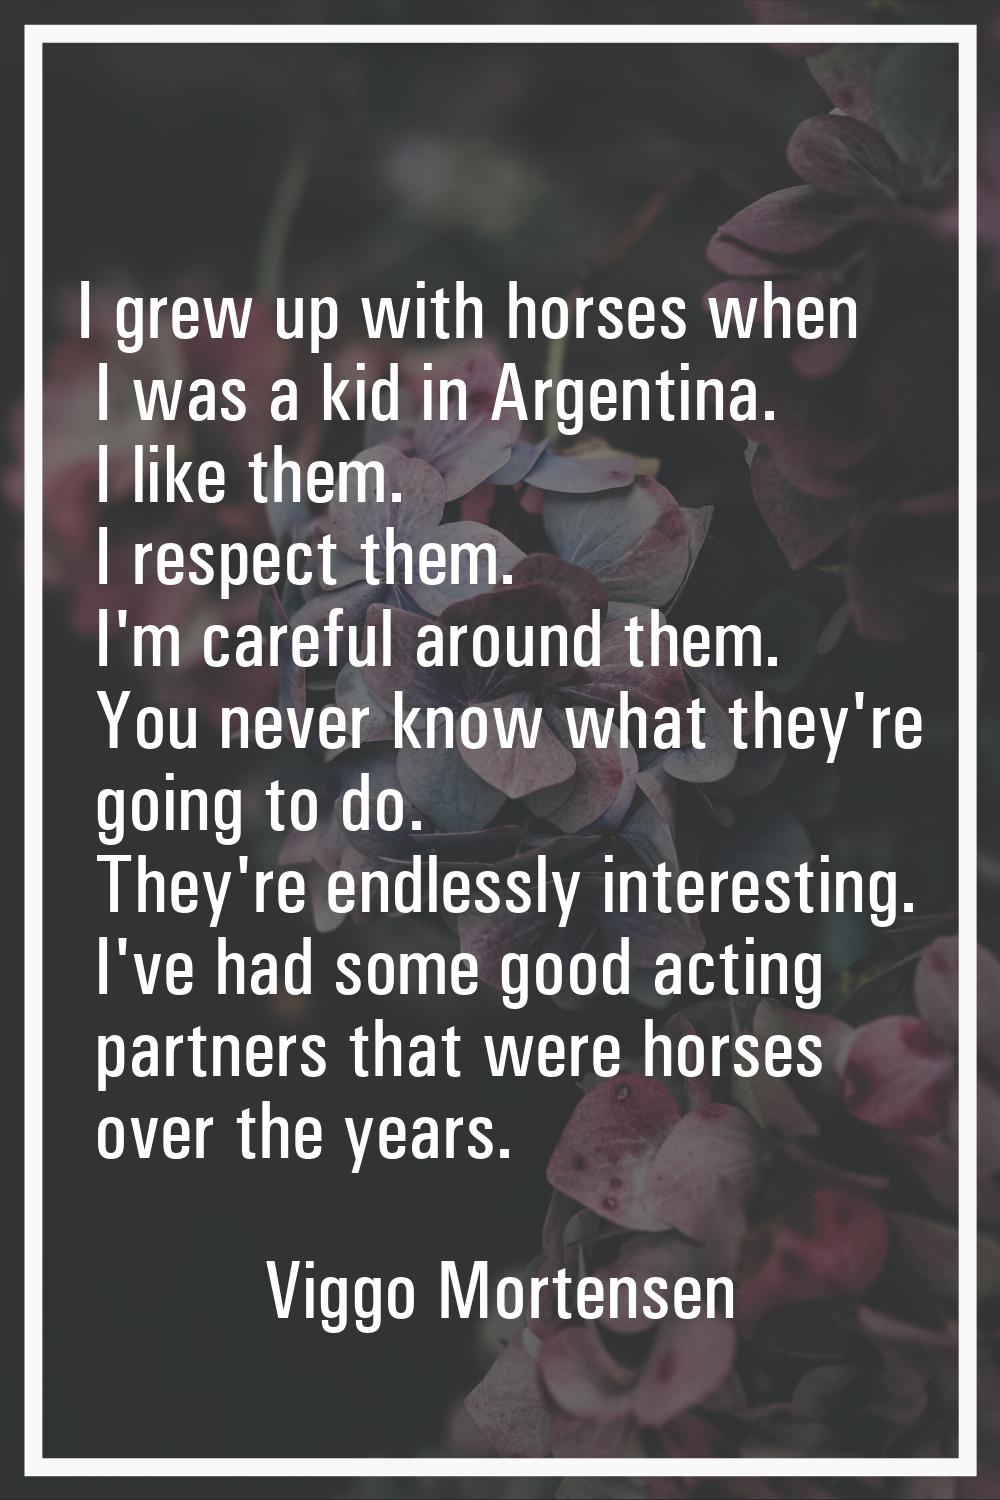 I grew up with horses when I was a kid in Argentina. I like them. I respect them. I'm careful aroun